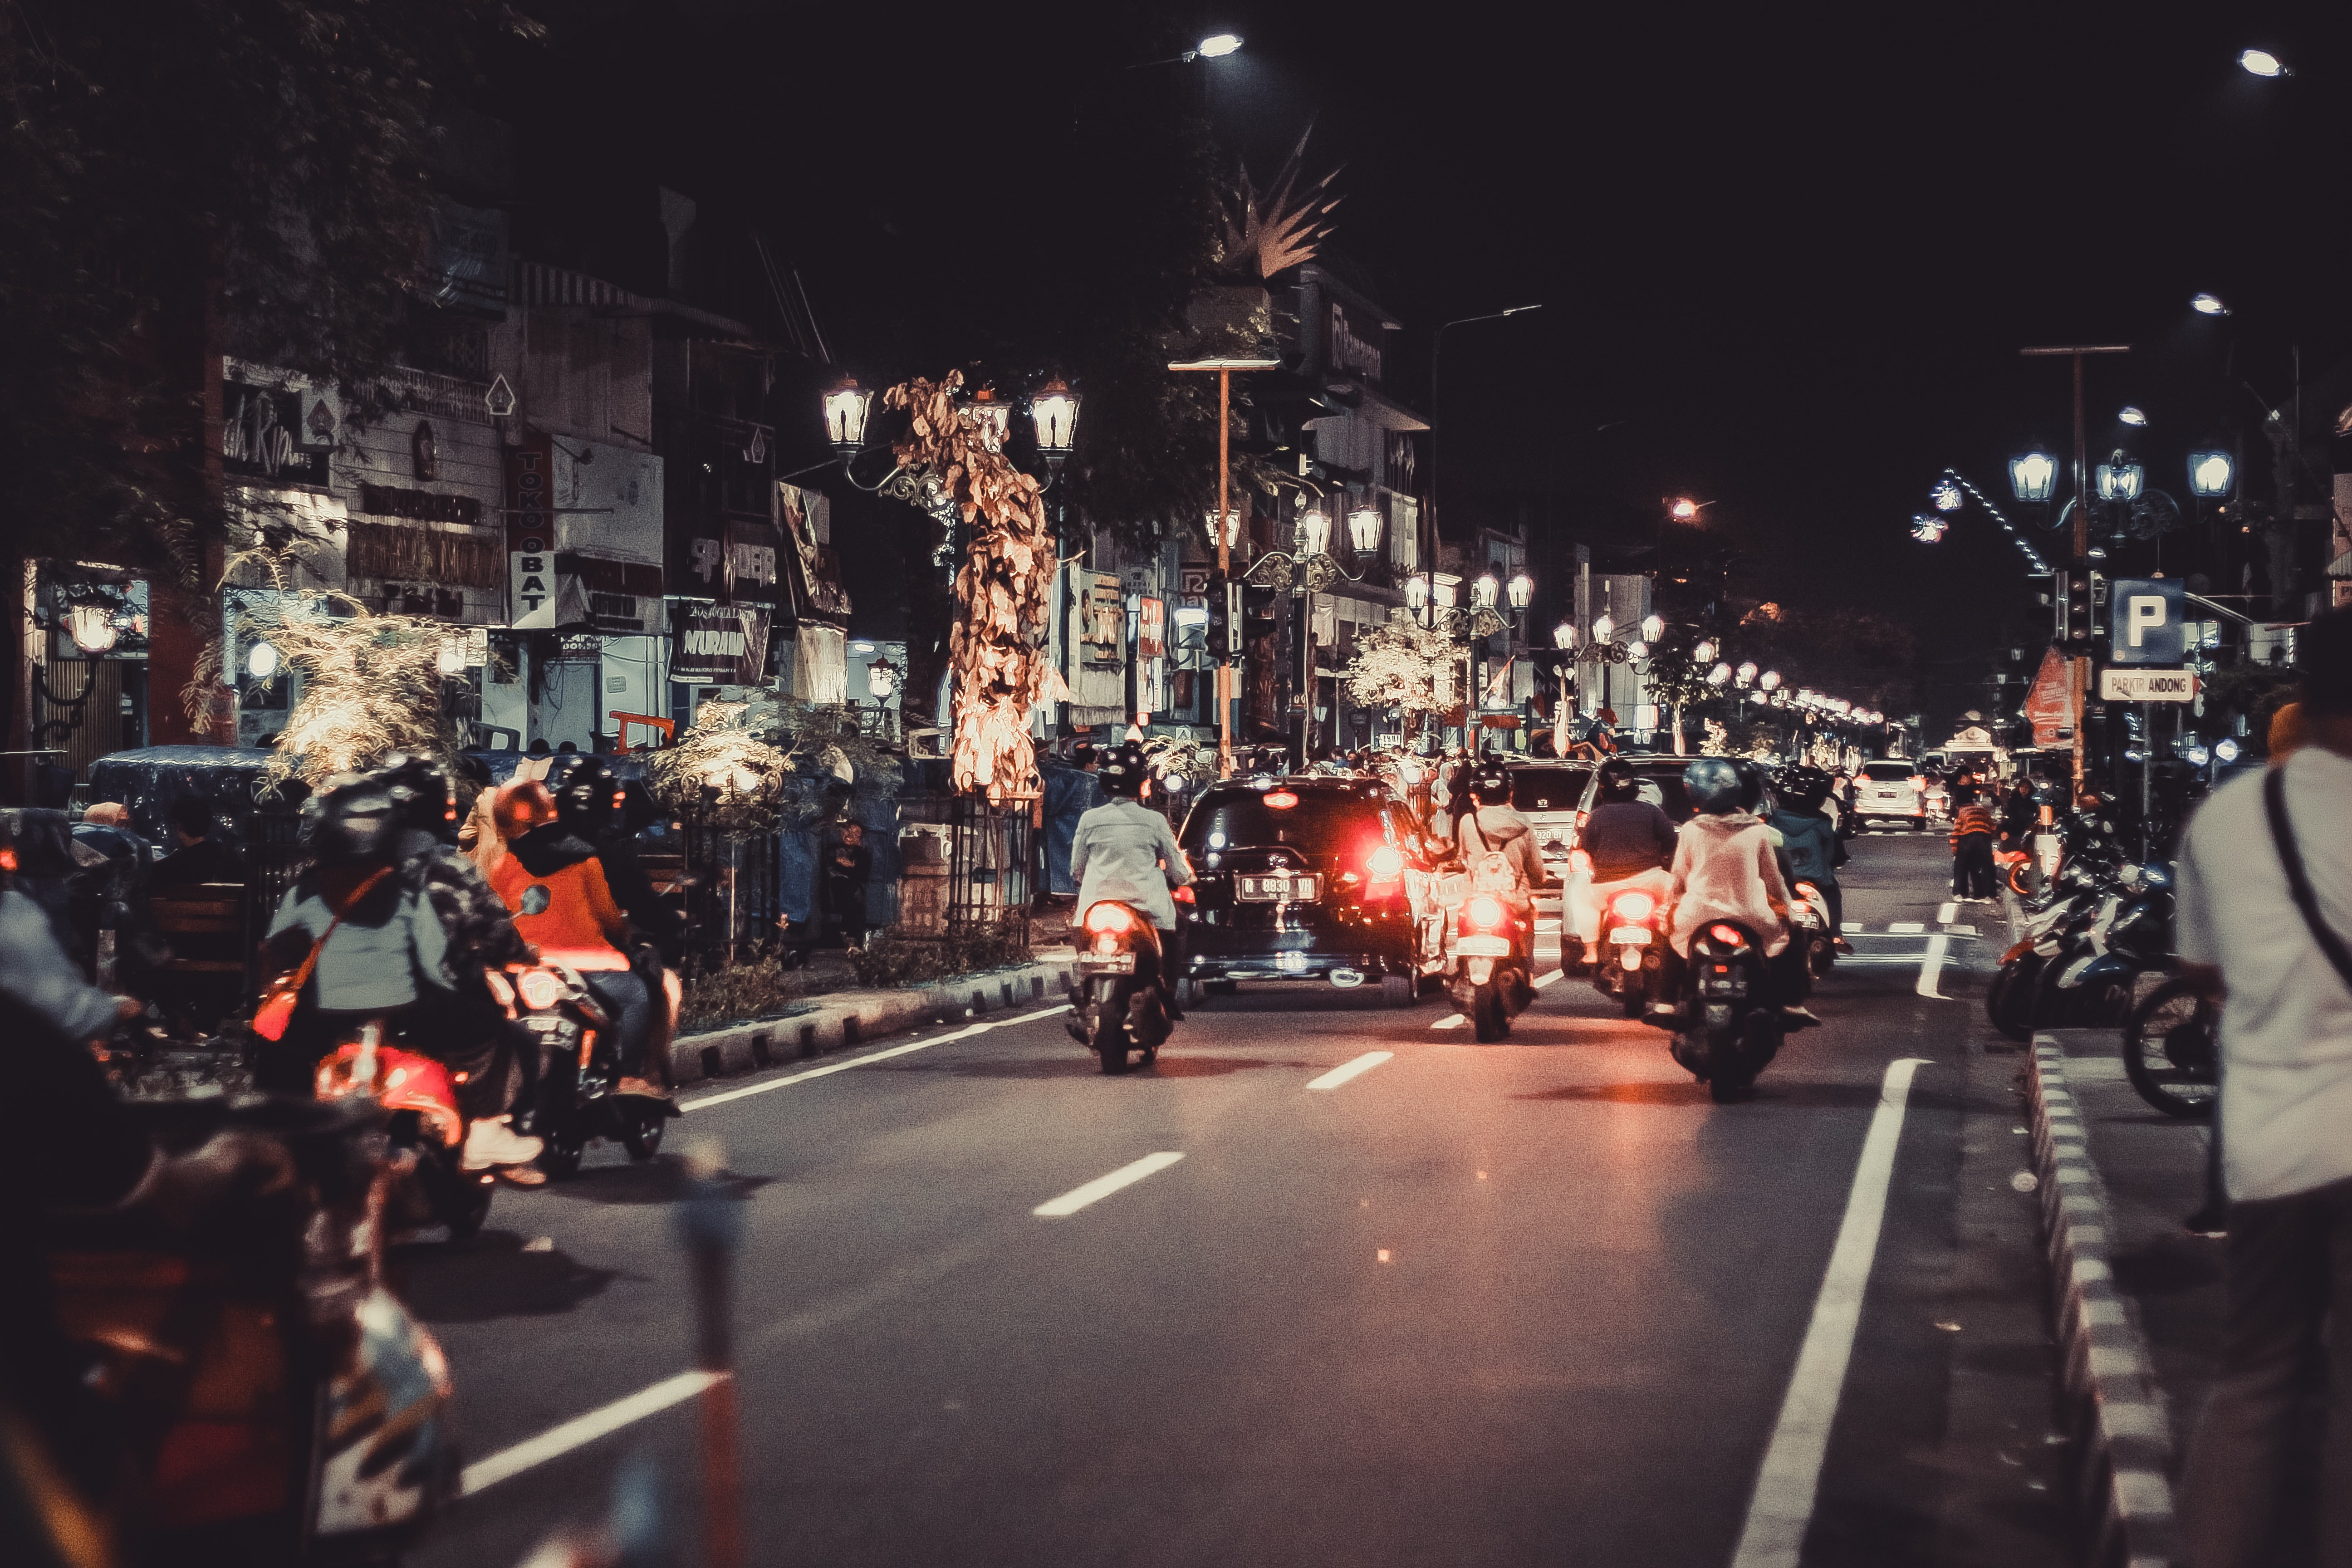 People riding motorcycles on road during night time photo